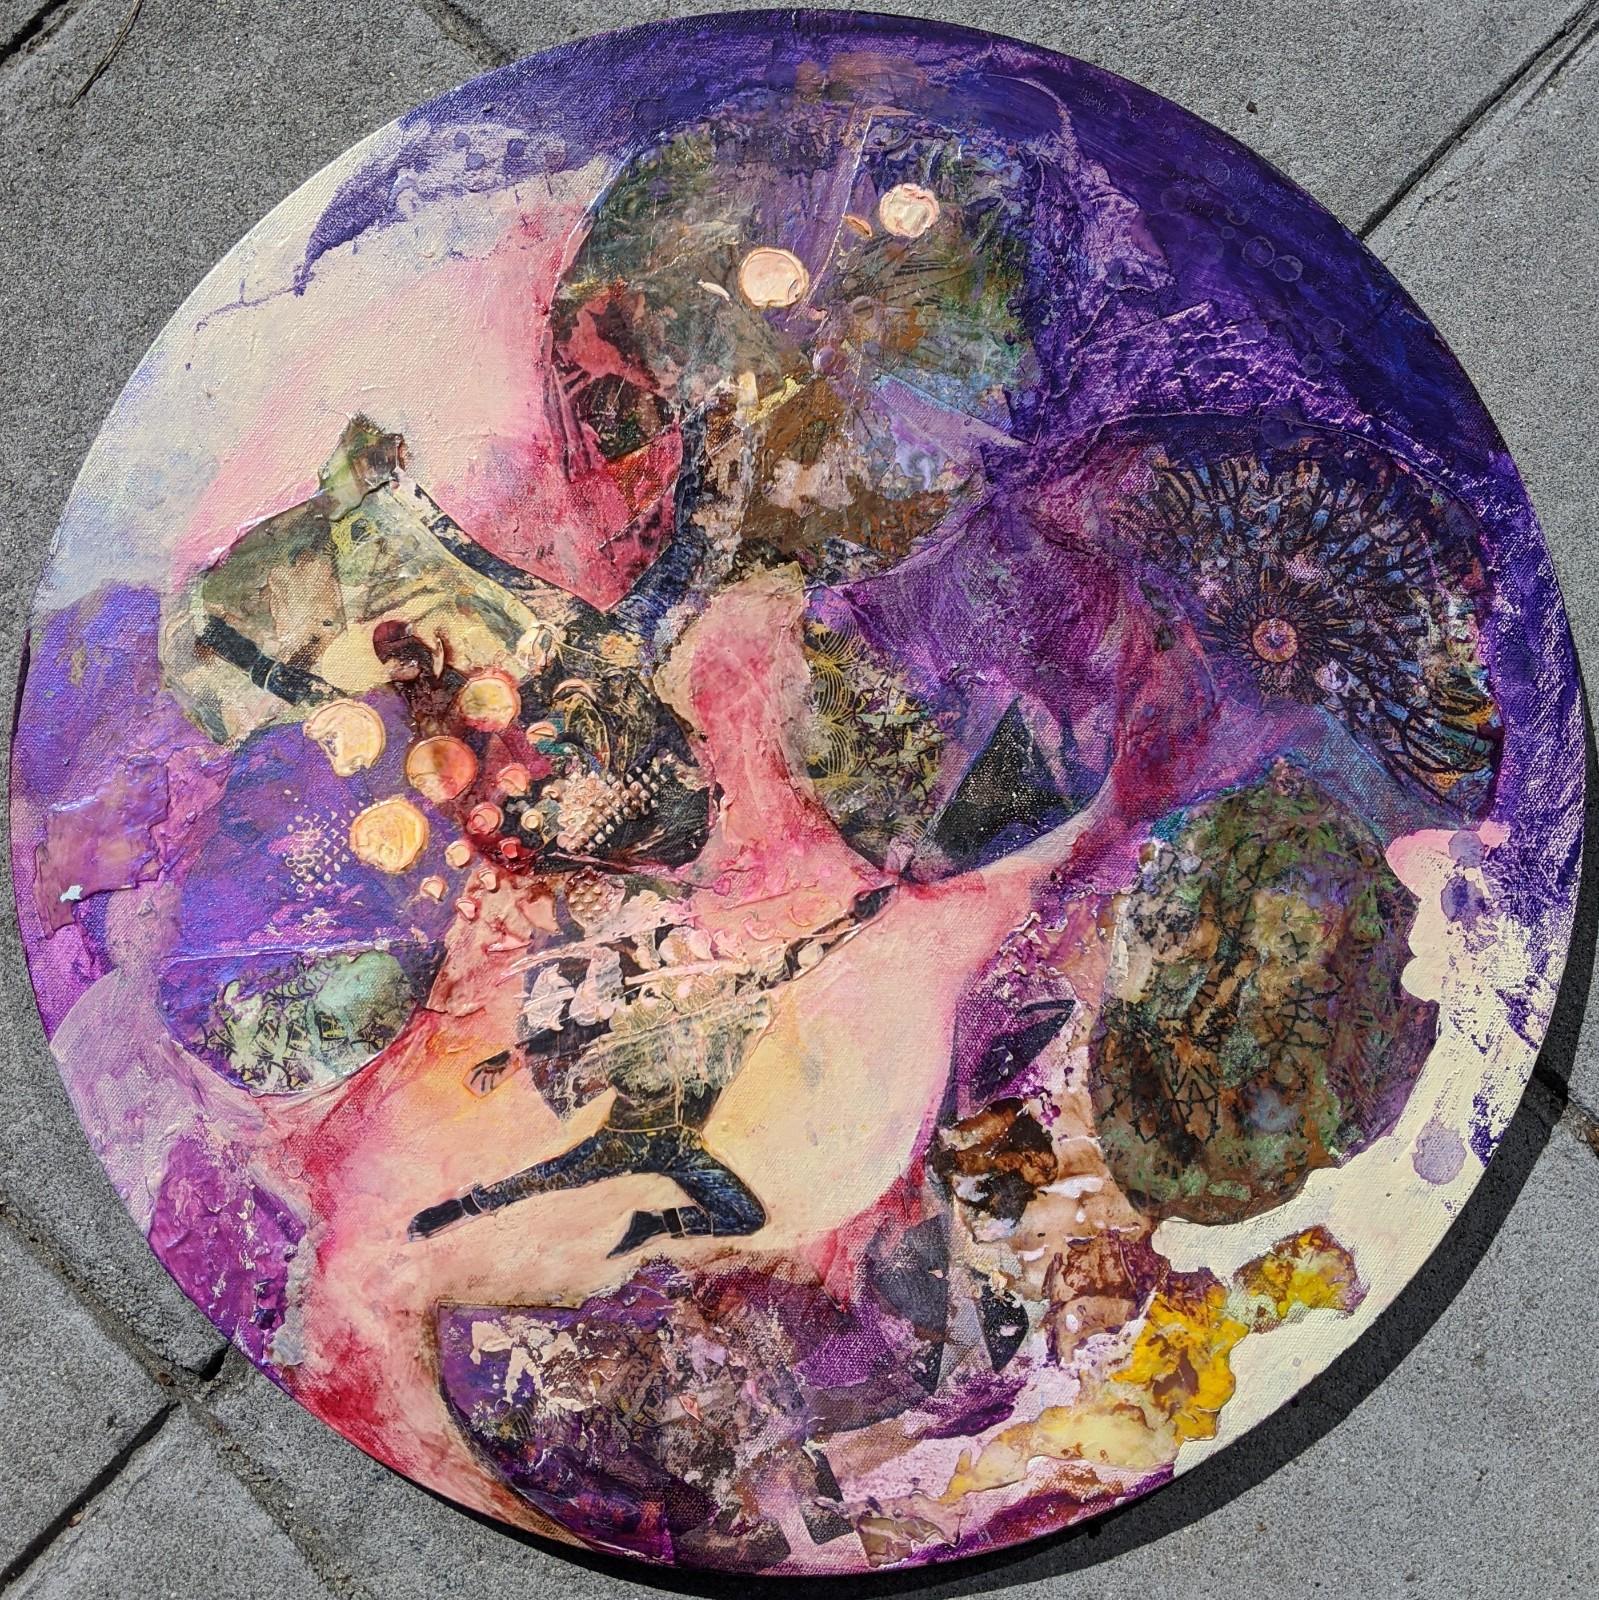 Jennifer Blalack Abstract Painting - Dawn - Circular Canvas with Mixed Media Abstract in Purple